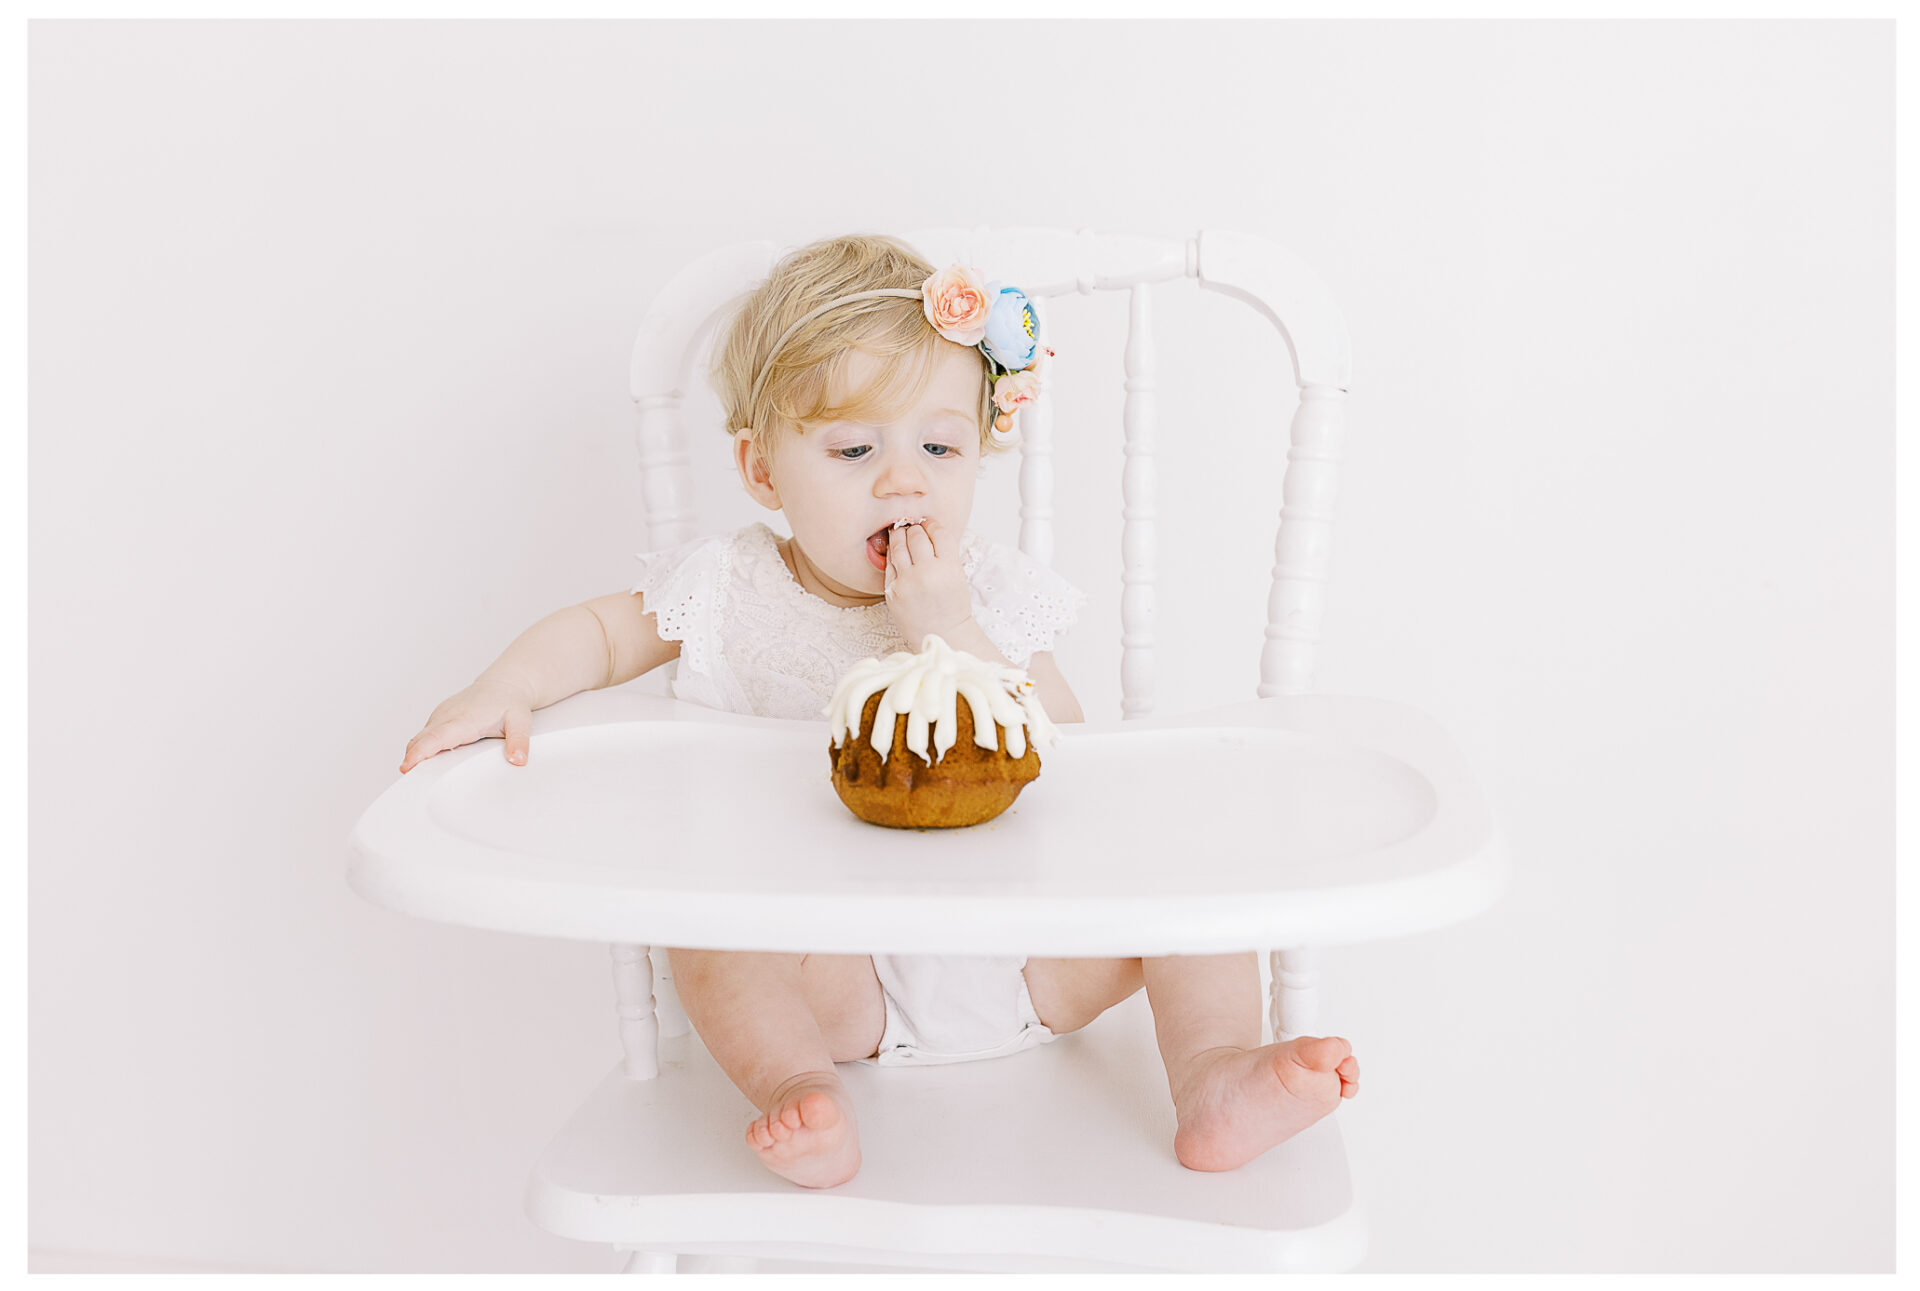 Winter Freire Photography | First birthday photos for baby girl in a photography studio eating her smash cake